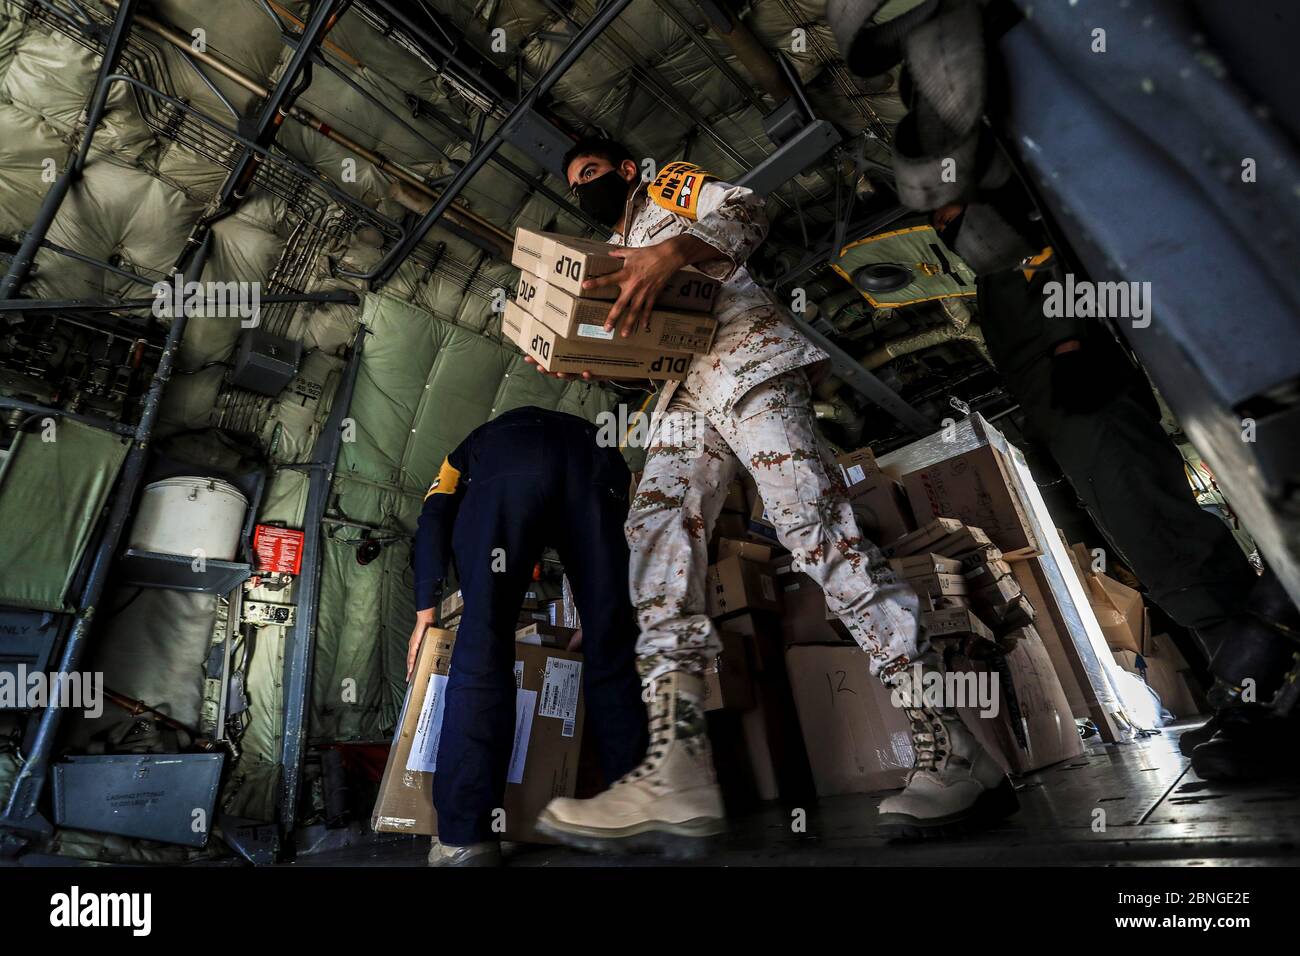 HERMOSILLO, MEXICO - MAY 14: Soldiers of the Mexican Army and Air Force unload Hercules C-130 aircraft, equipment, material and medical supplies to attend the health emergency due to the Coronavirus on May 14, 2020 in Hermosillo, Mexico. Landing (Photo by Luis Gutierrez / Norte Photo /)  HERMOSILLO, MEXICO - MAY 14: Soldados del ejercito mexicano y  Fuerza Aérea descargan de avion Hércules C-130 equipo, material e insumos médicos para atender la emergencia sanitaria por el Coronavirus on May 14, 2020 in Hermosillo, Mexico. Aterrizaje (Photo by Luis Gutierrez/ Norte Photo/) Stock Photo